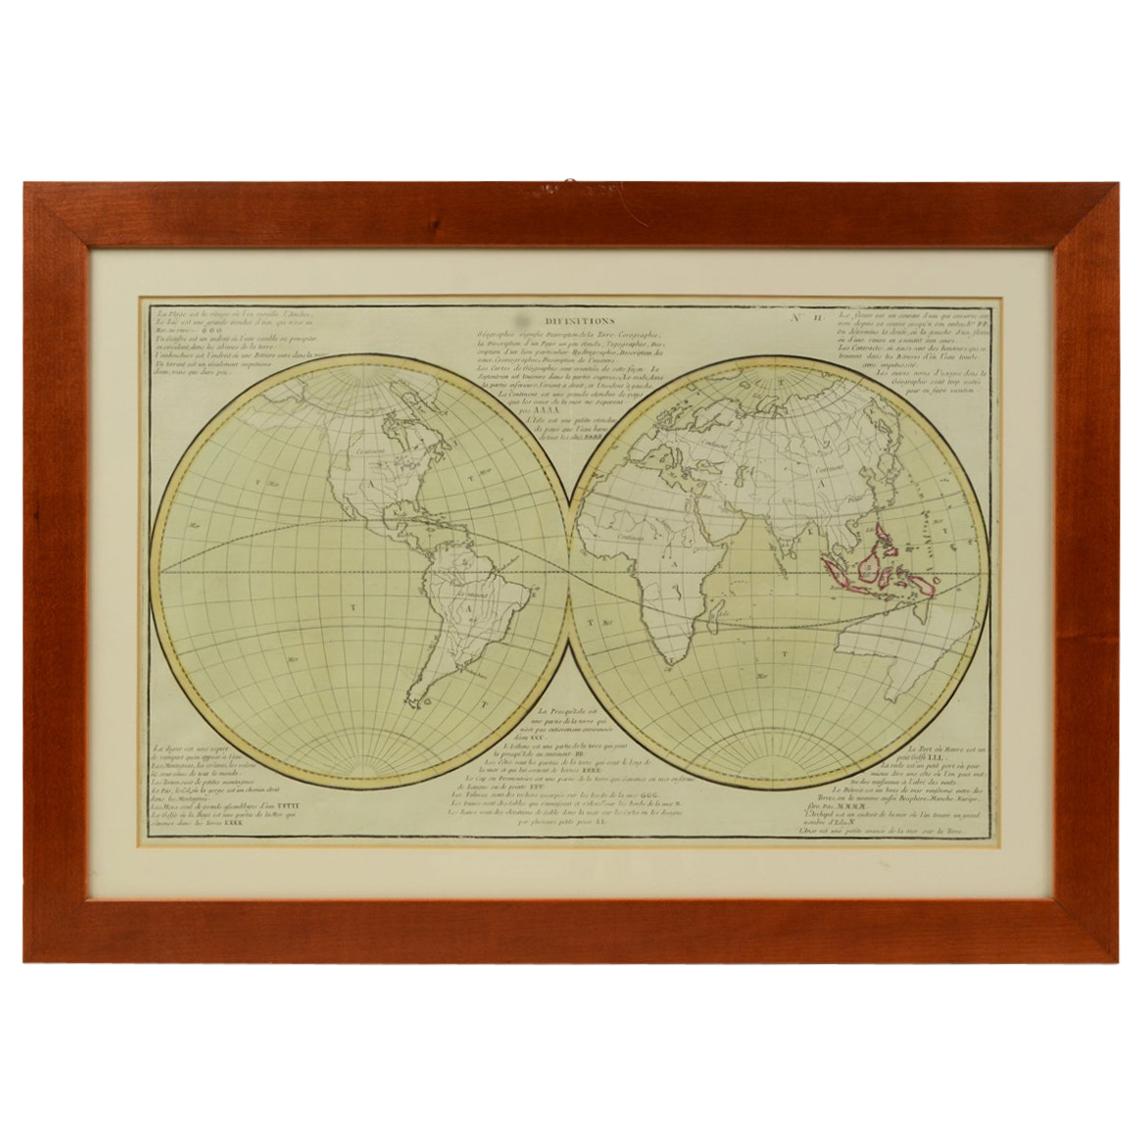 1850 Old French Map Depicting the Entire Earth's Surface Divided into Two Parts